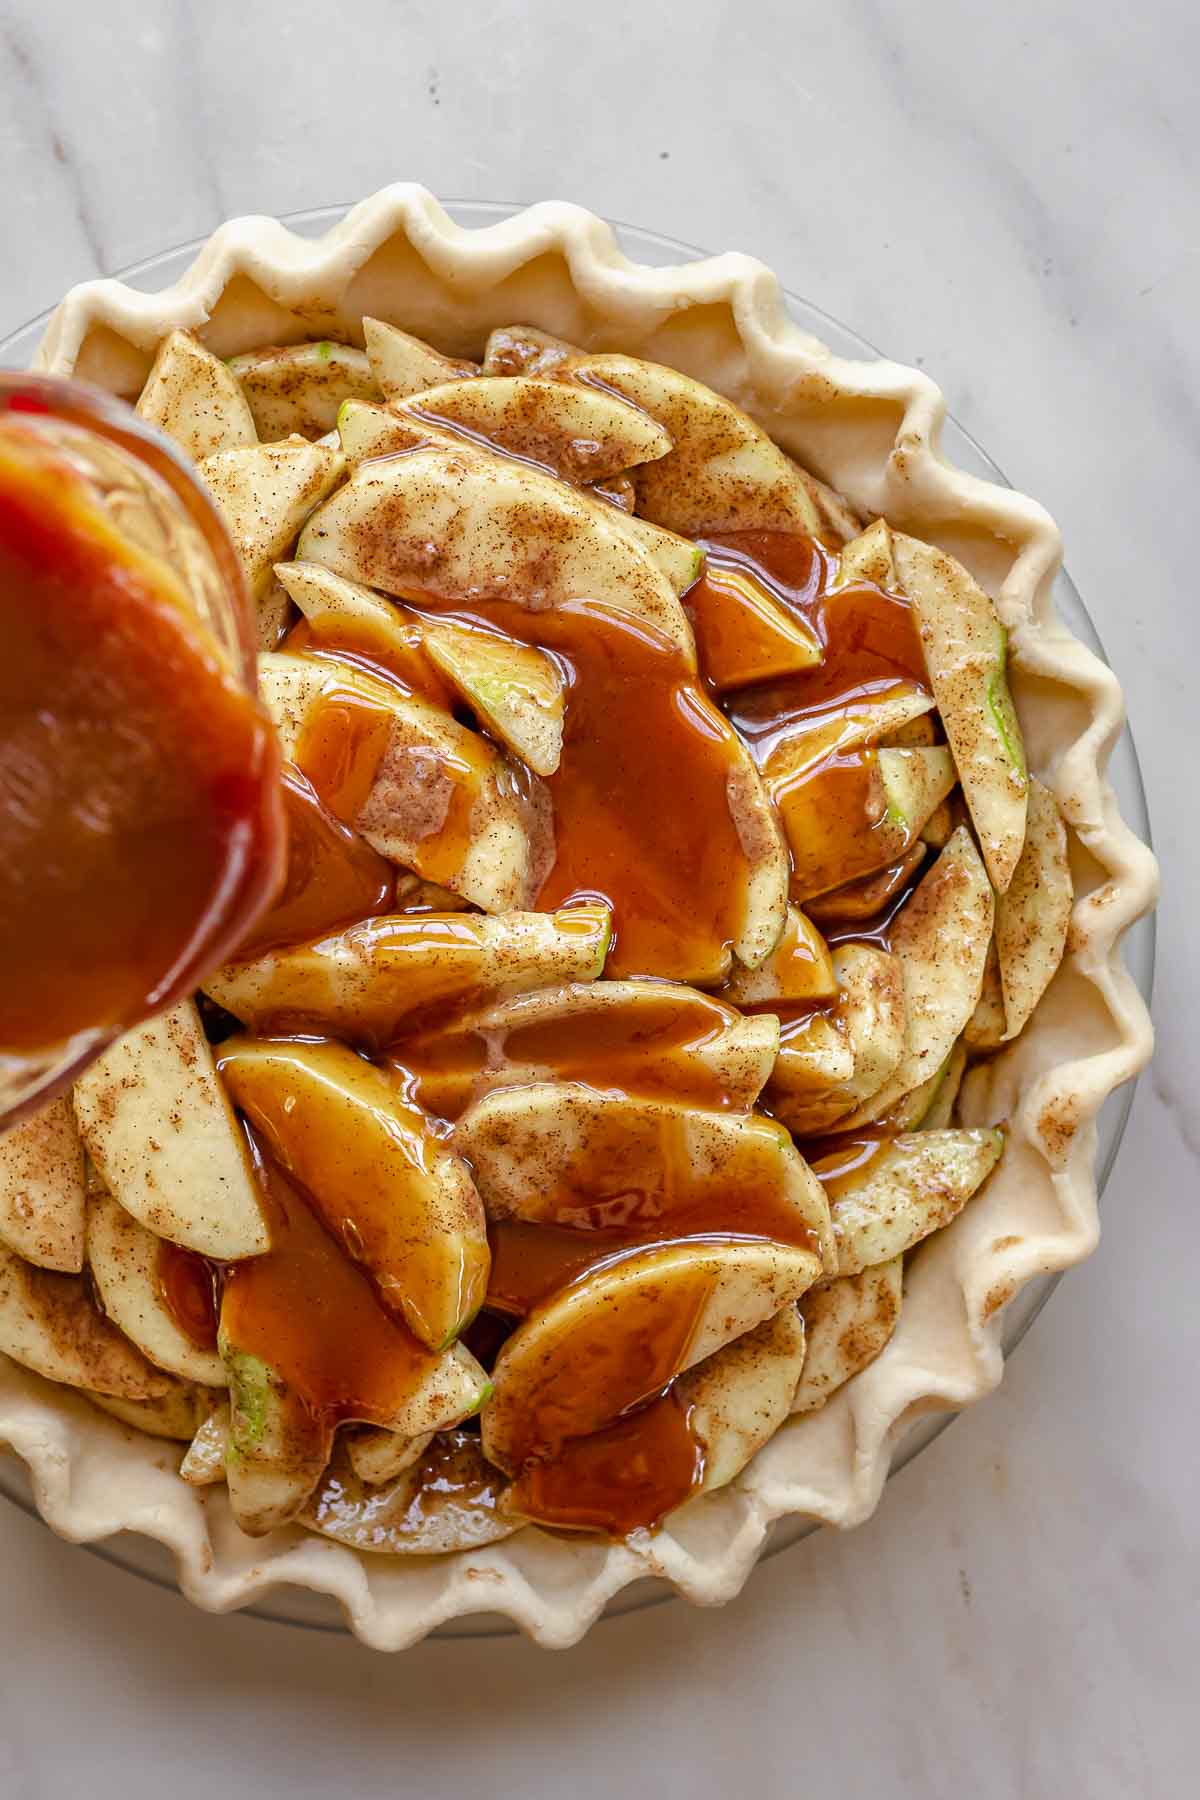 Salted caramel pouring over apples in a pie dish.